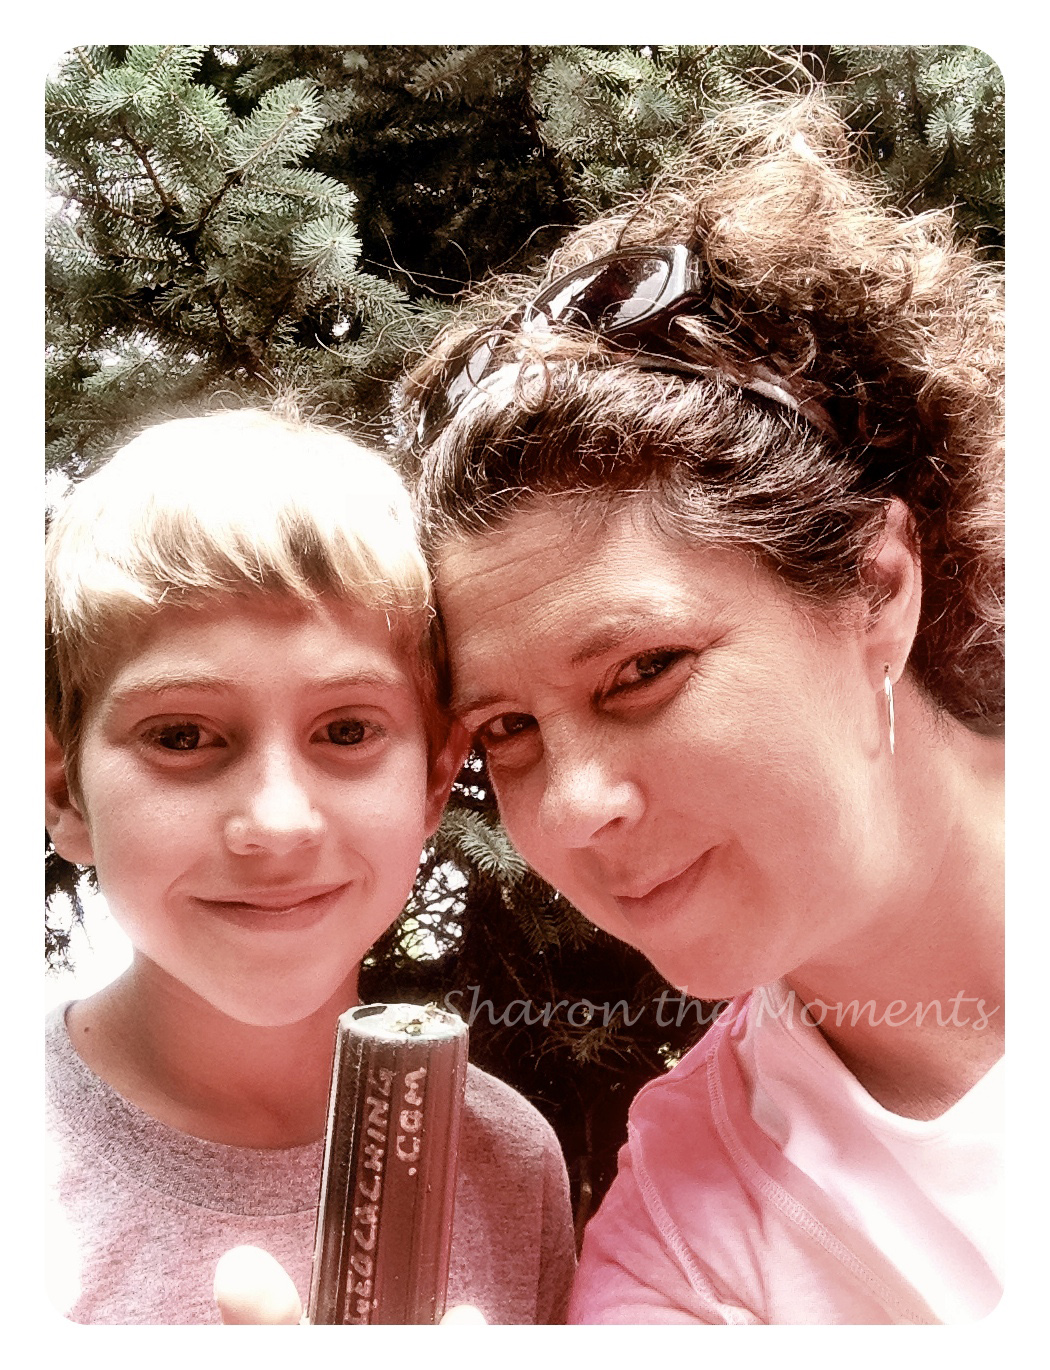 We Geocache. Do You Geocache?|Sharon the Moments Blog